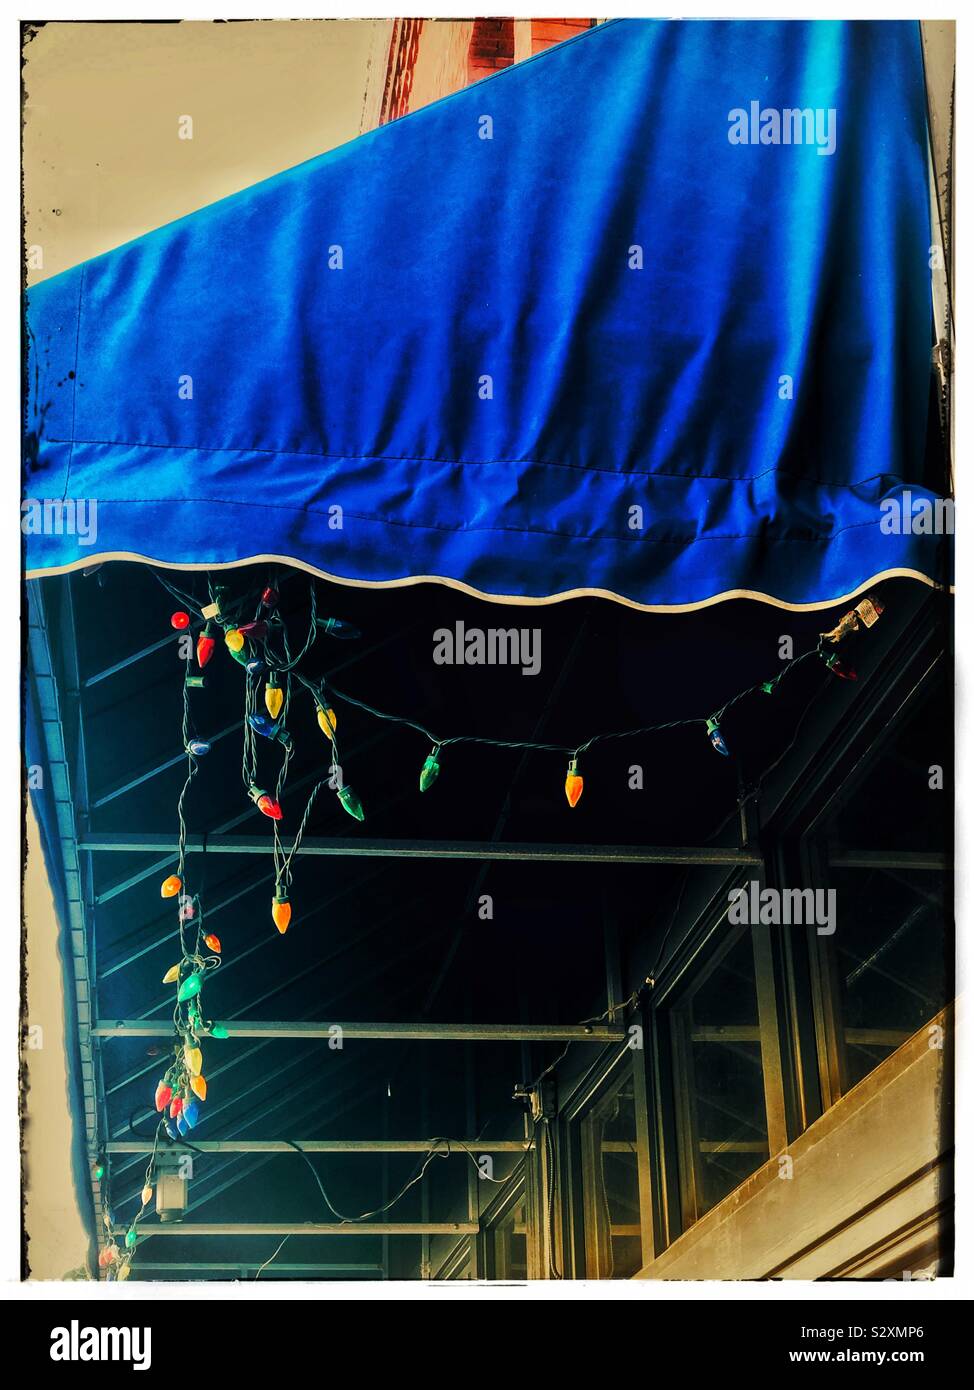 Blue awning with hanging colored lights Stock Photo